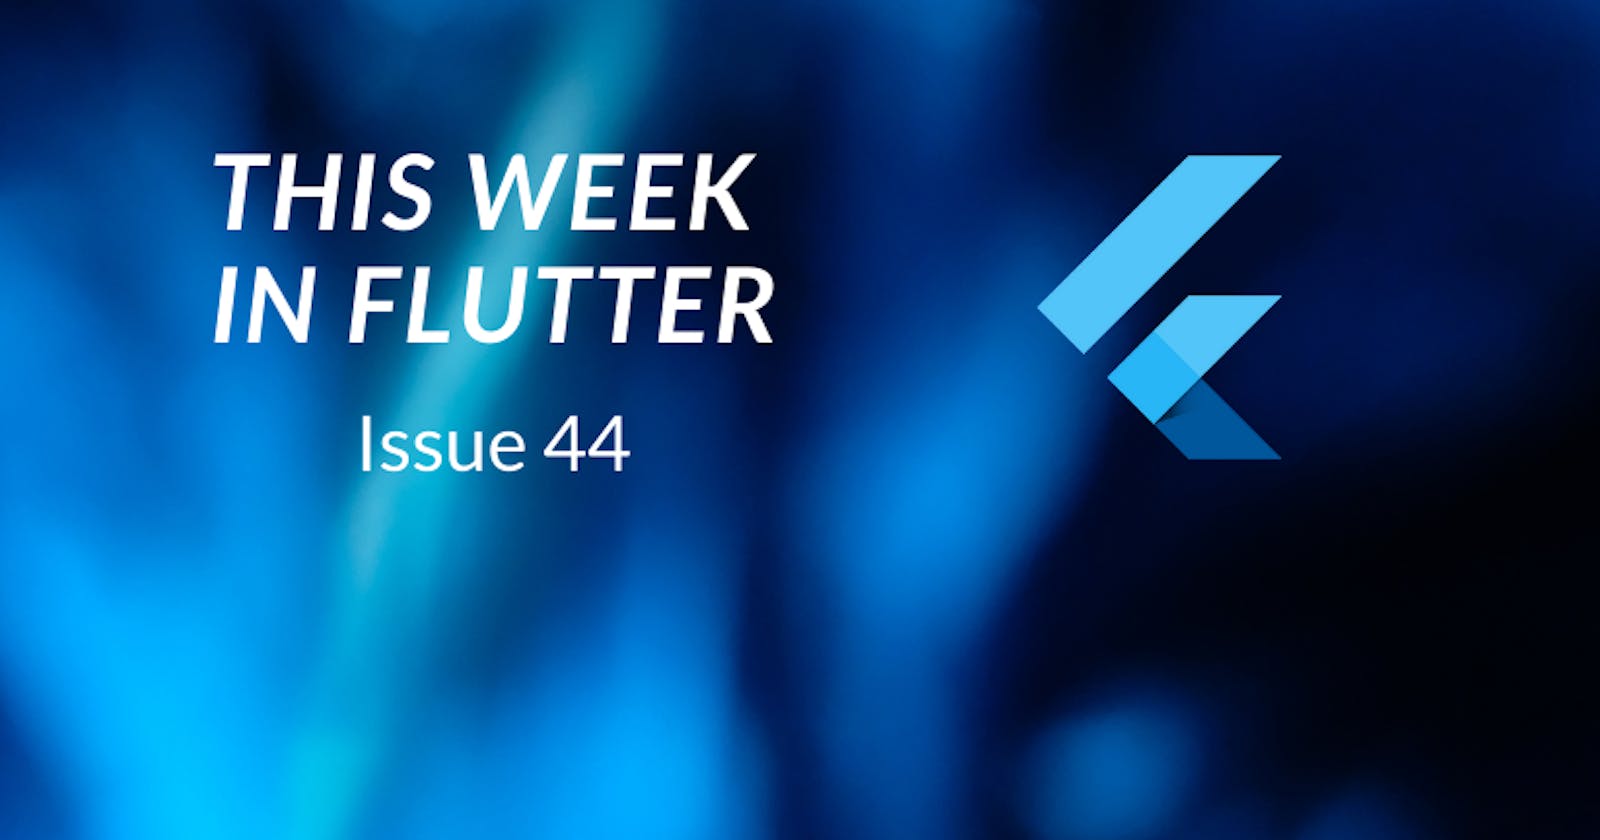 This week in Flutter #44